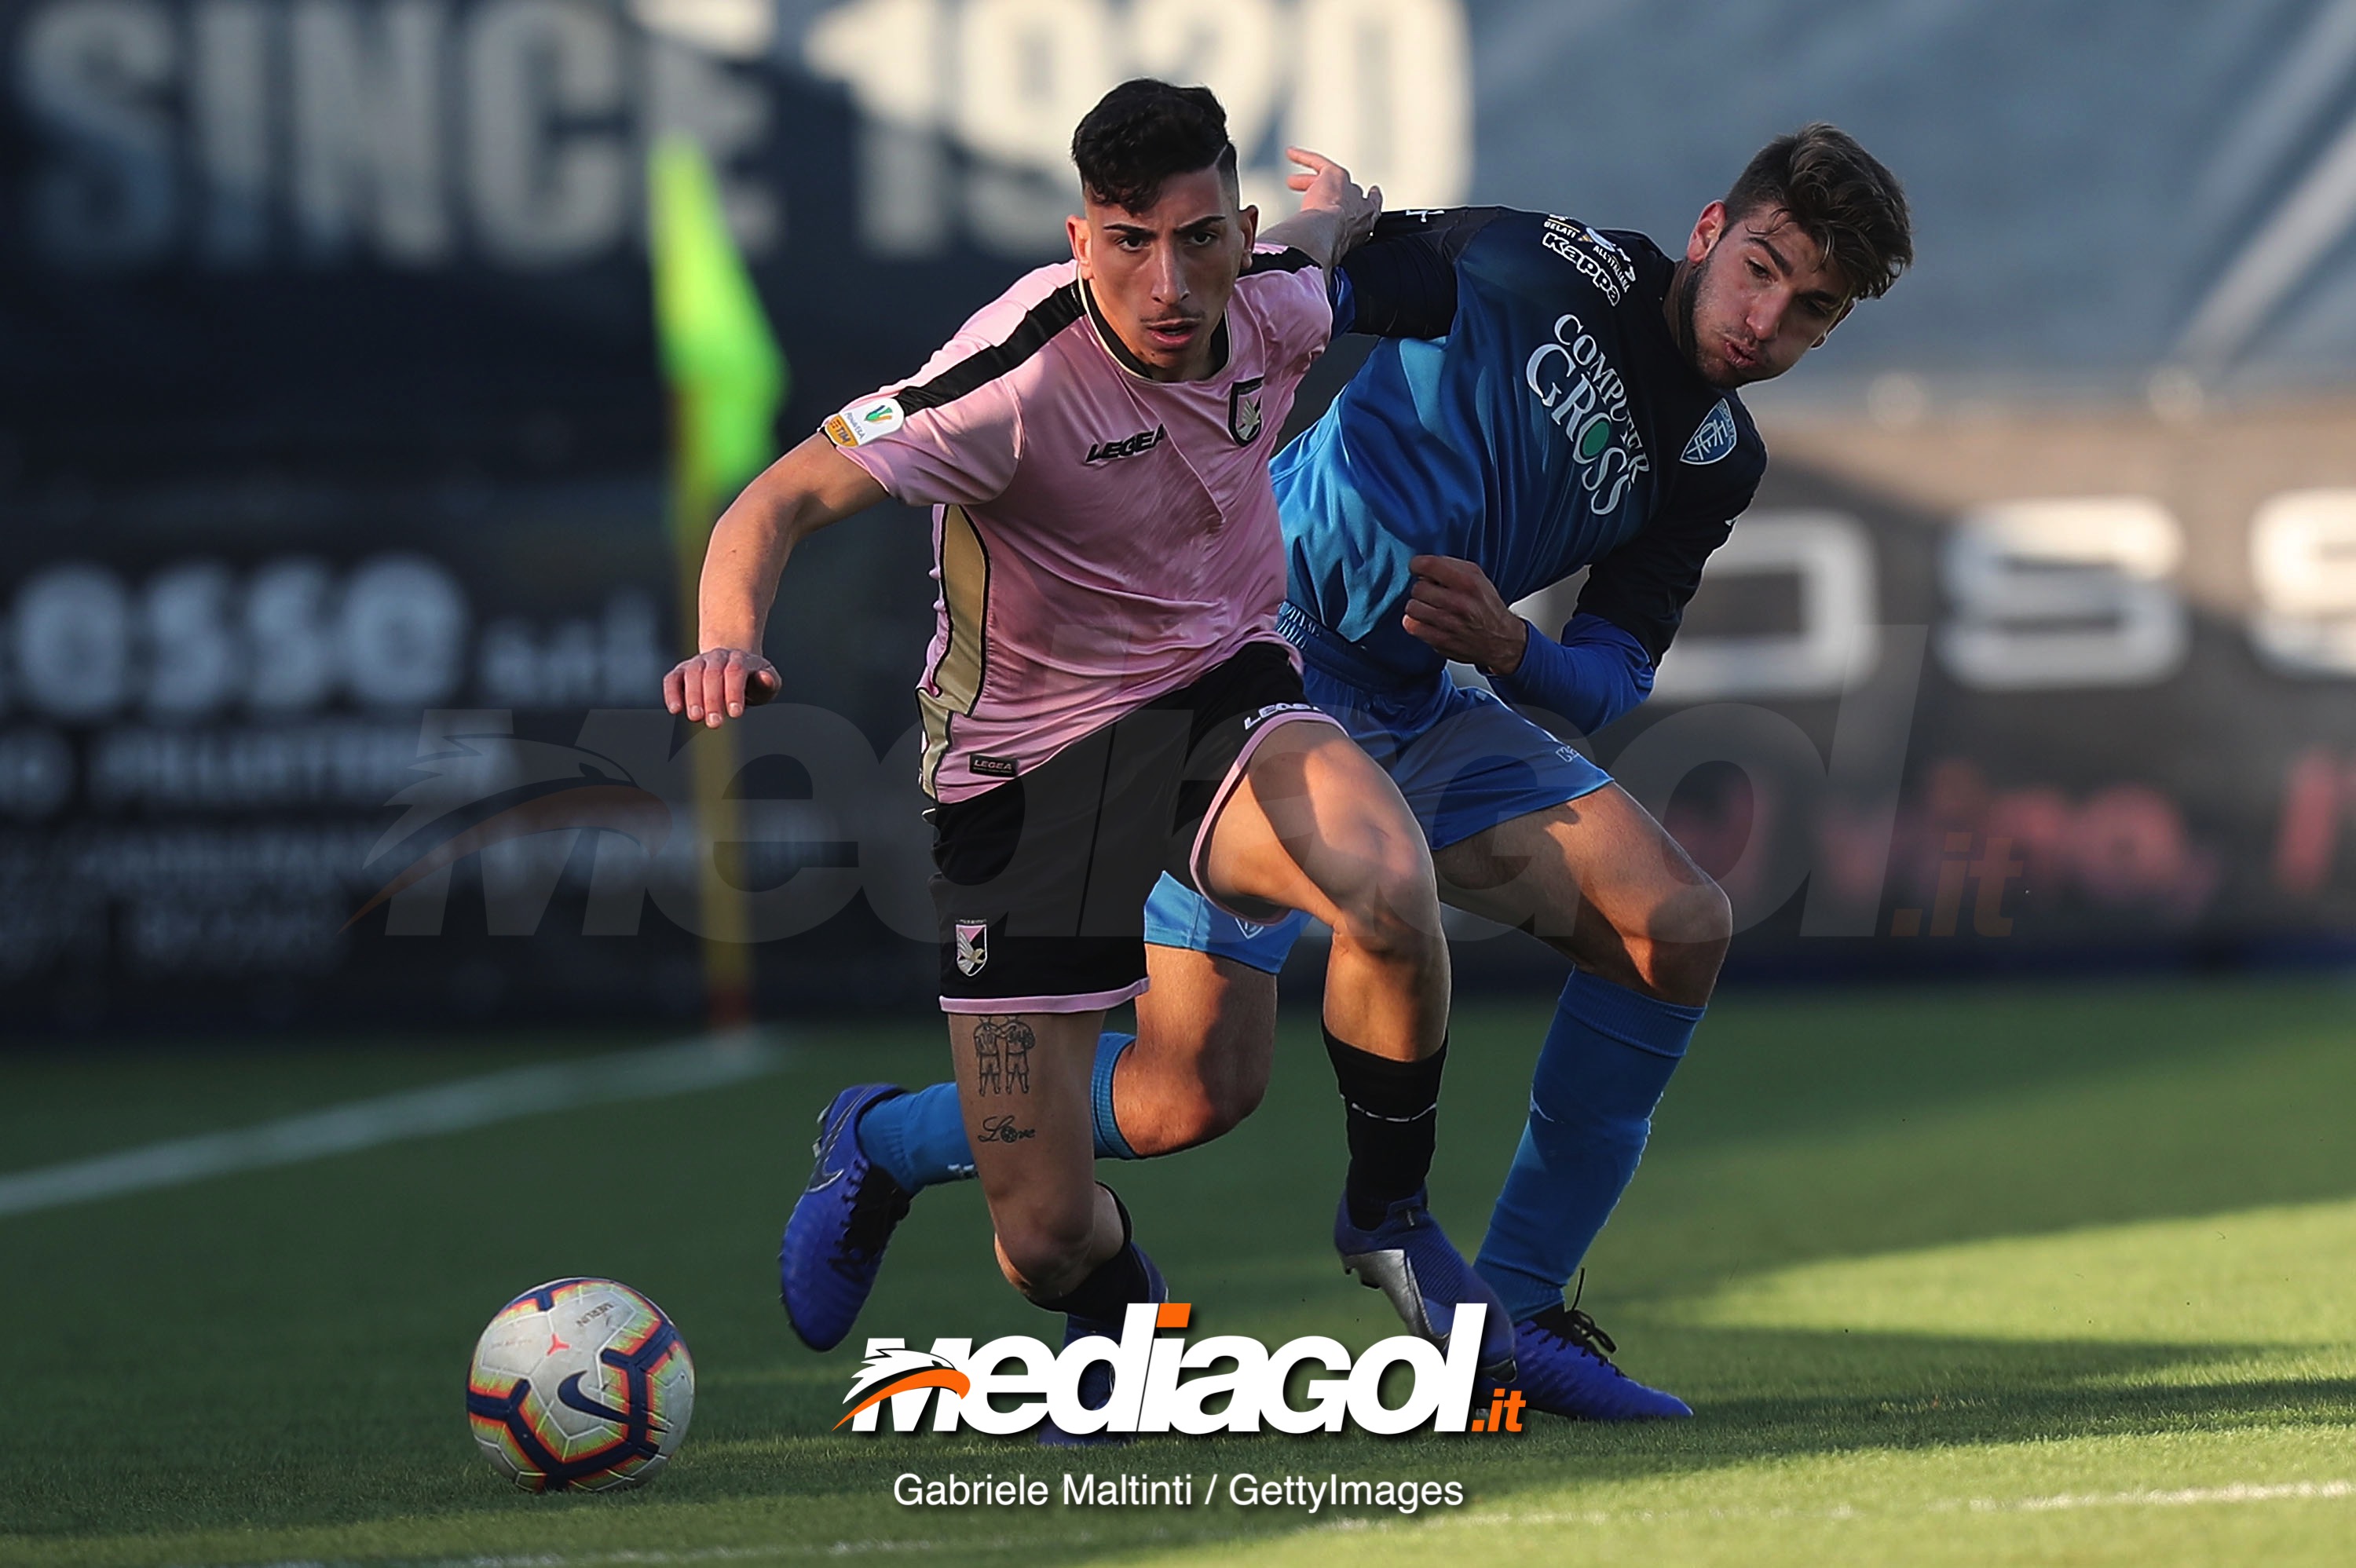 EMPOLI, ITALY - JANUARY 12: Gabriele Perretta of Empoli Fc in action during the Serie A Primavera between Empoli FC and Citta' di Palermo on January 12, 2019 in Empoli, Italy.  (Photo by Gabriele Maltinti/Getty Images)